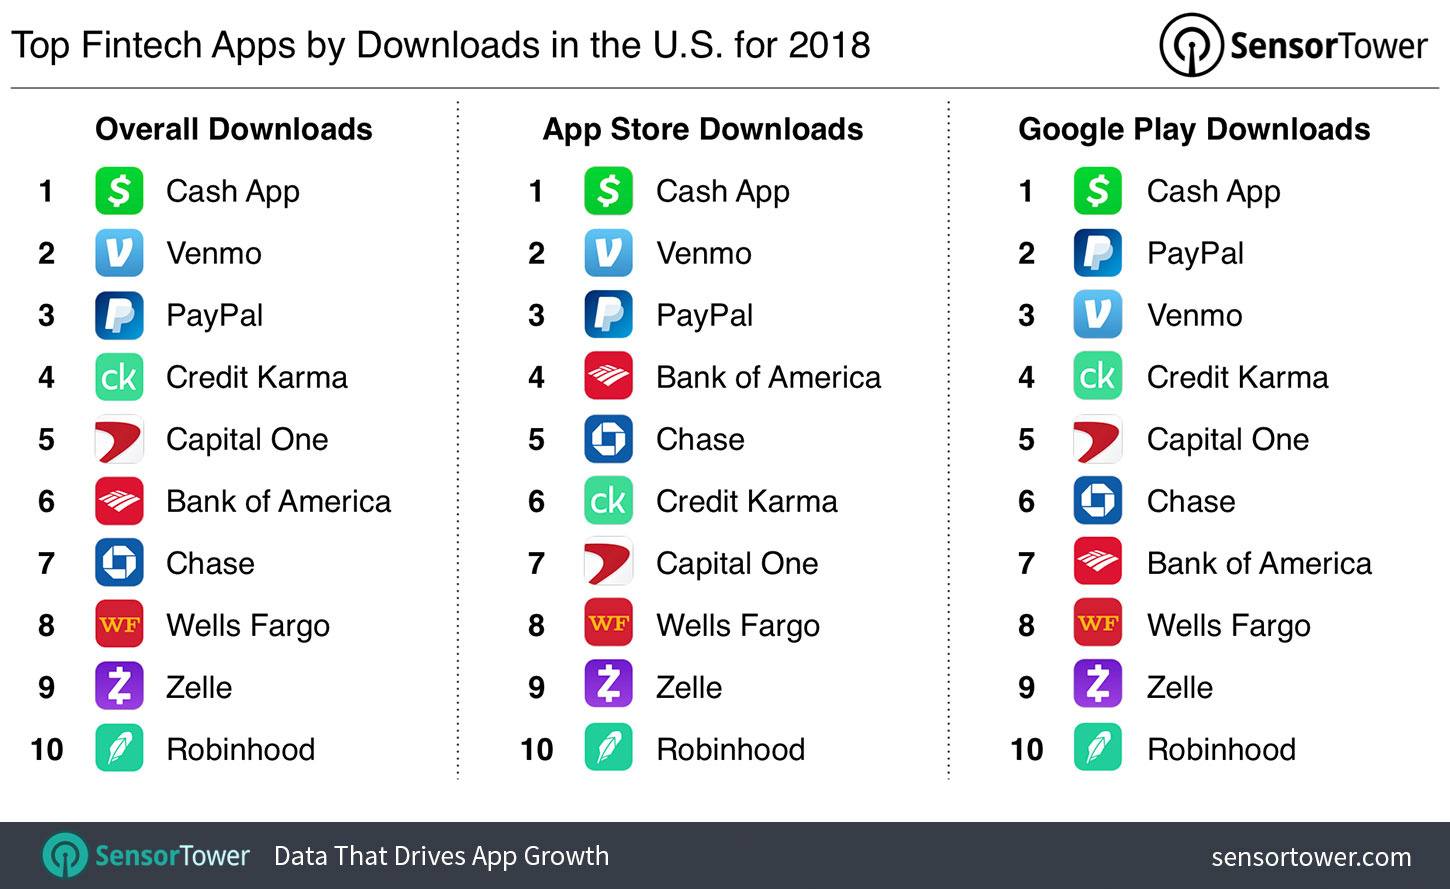 Top Fintech Apps by Downloads in the U.S. for 2018